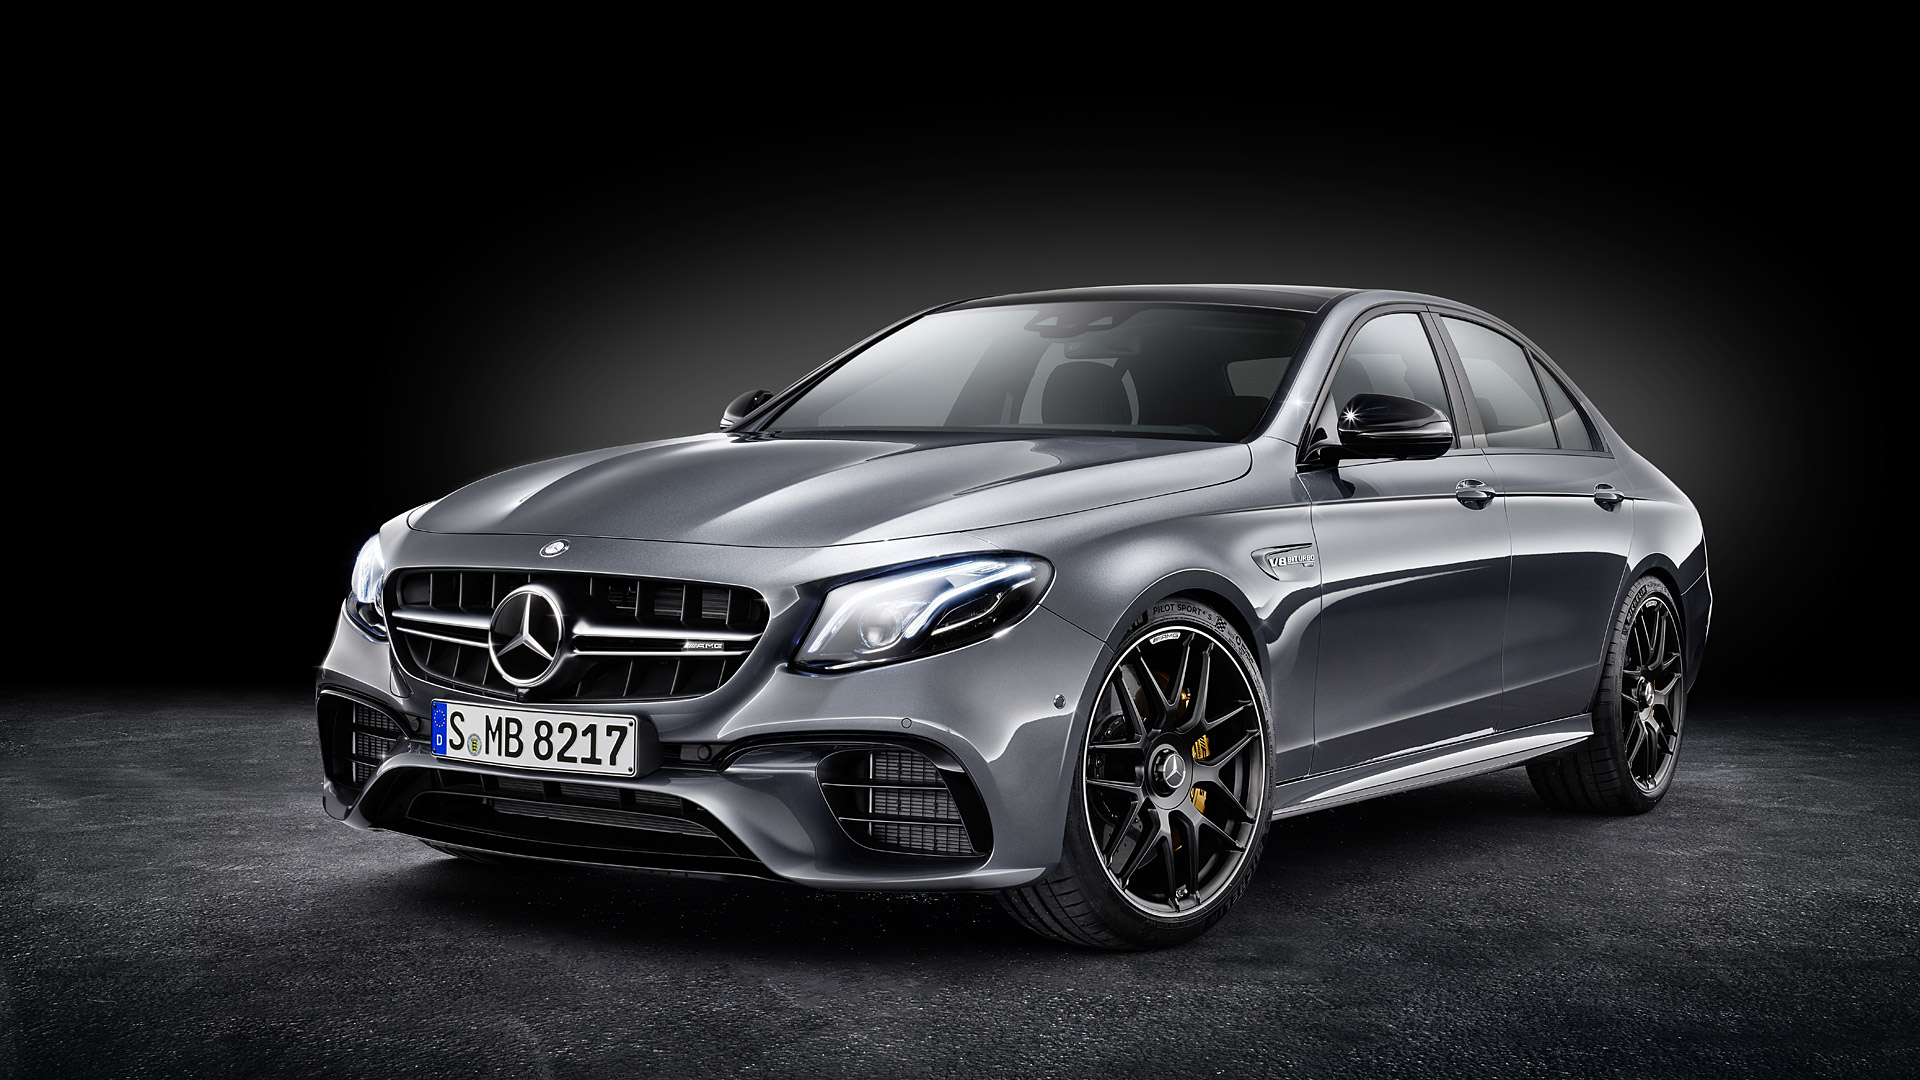 Free Download 2017 Mercedes Benz E63 AMG Wallpaper HD Image WSupercars [1920x1080] For Your Desktop, Mobile & Tablet. Explore Mercedes Benz 2017 Wallpaper. Mercedes Benz 2017 Wallpaper, Mercedes Benz Wallpaper, 2017 Mercedes Benz